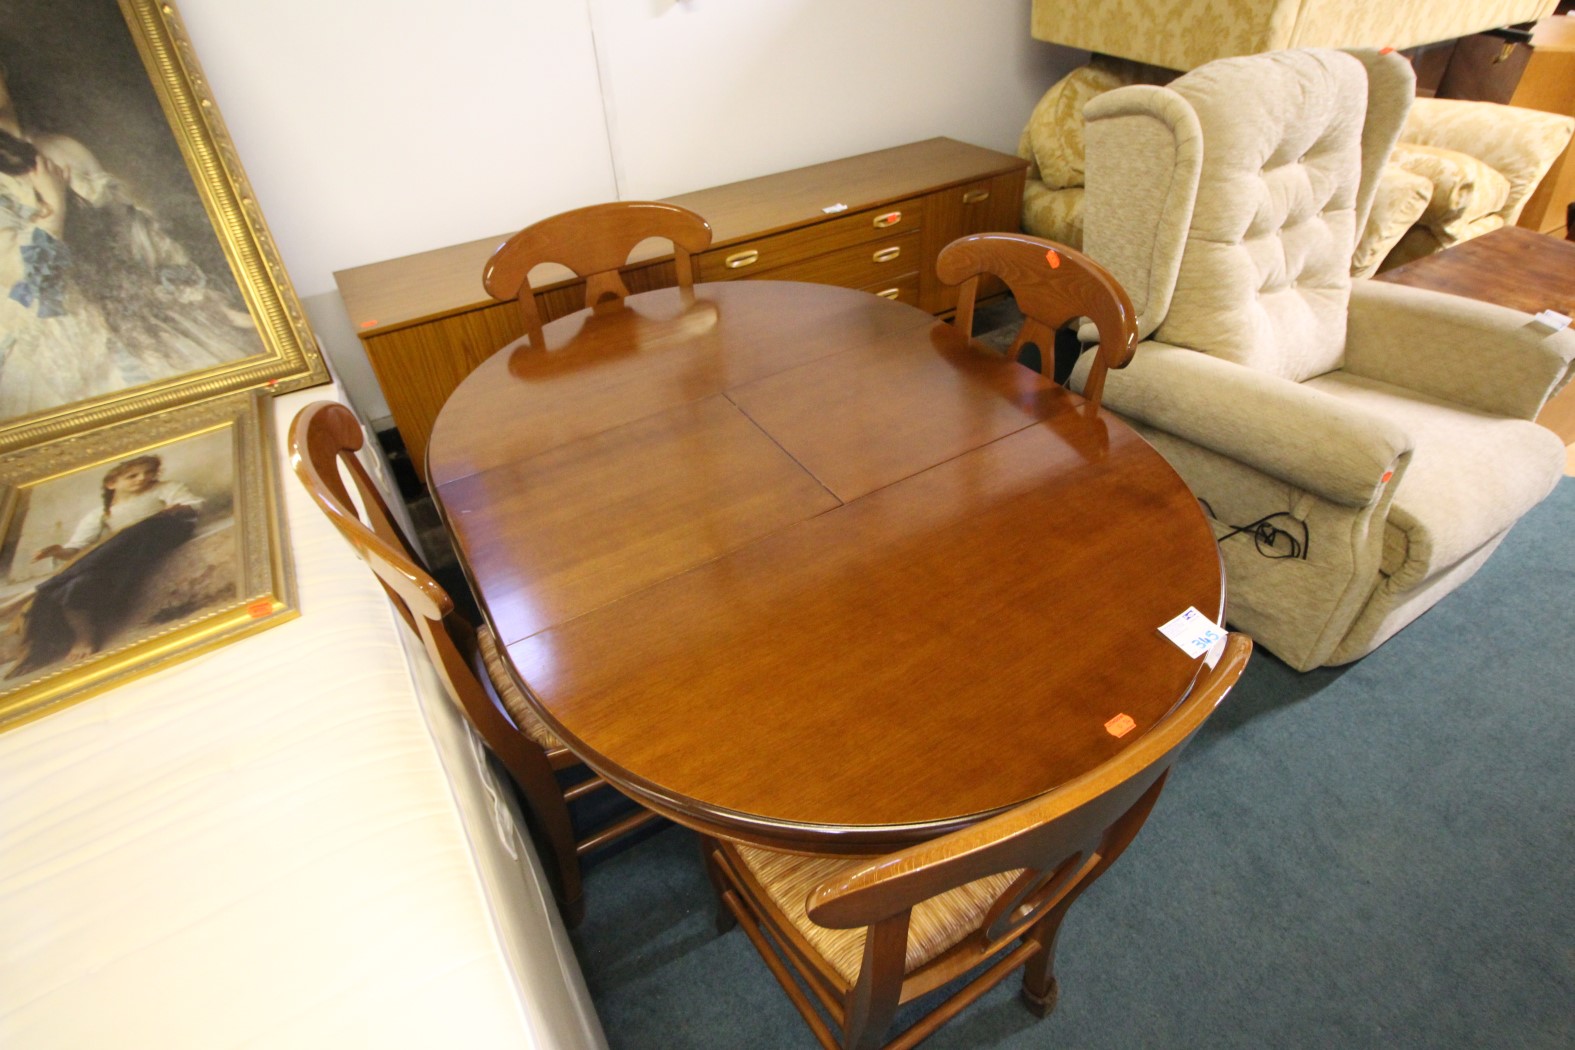 TEAK TABLE AND CHAIRS Â£40